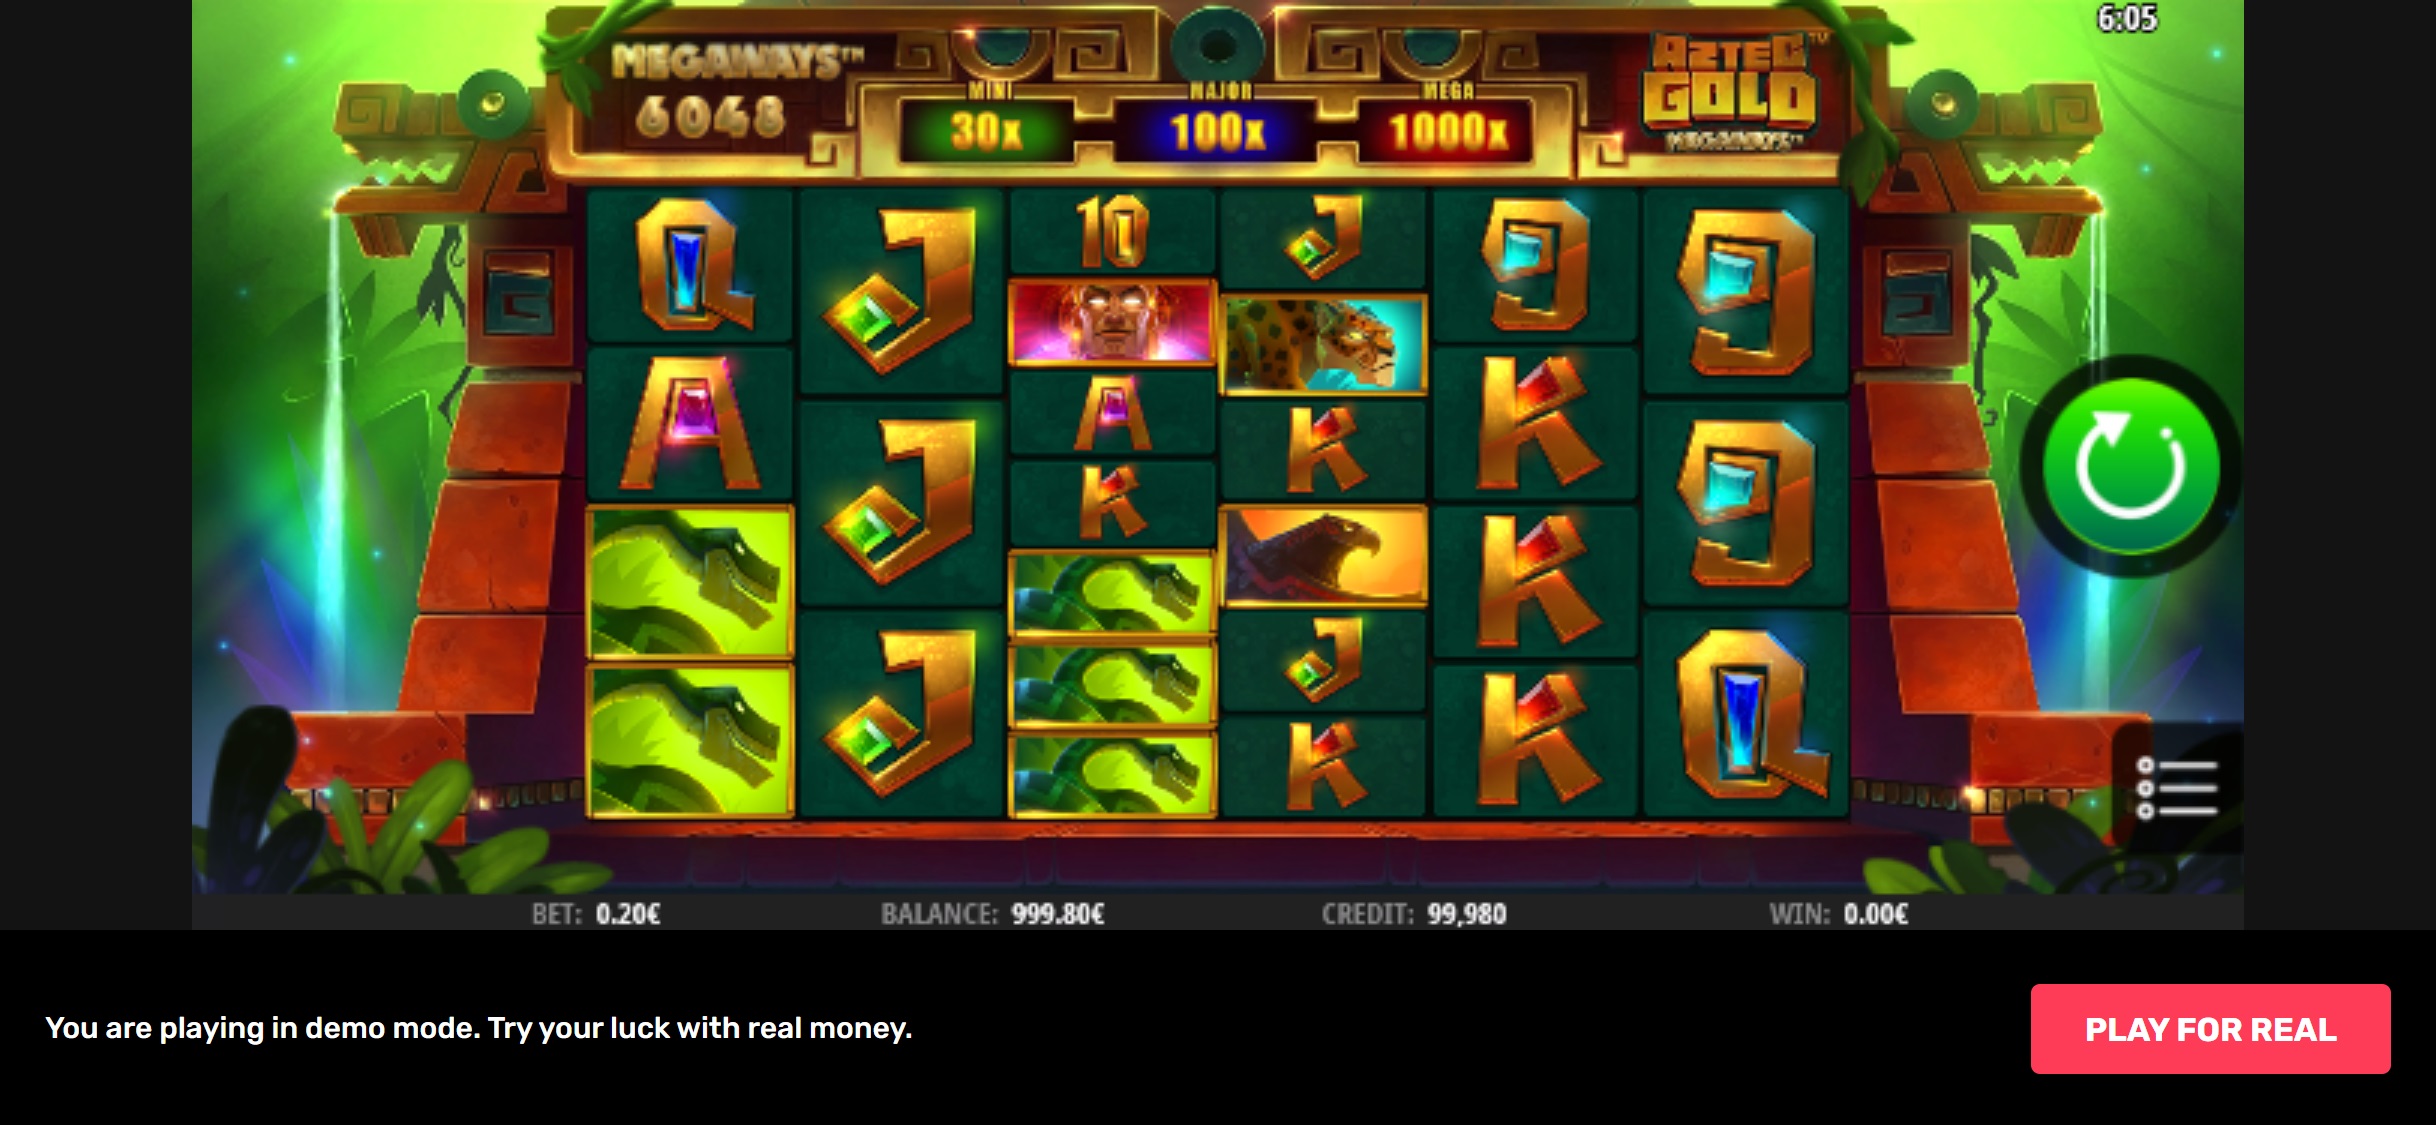 JustSpin Casino Mobile Slot Games Review